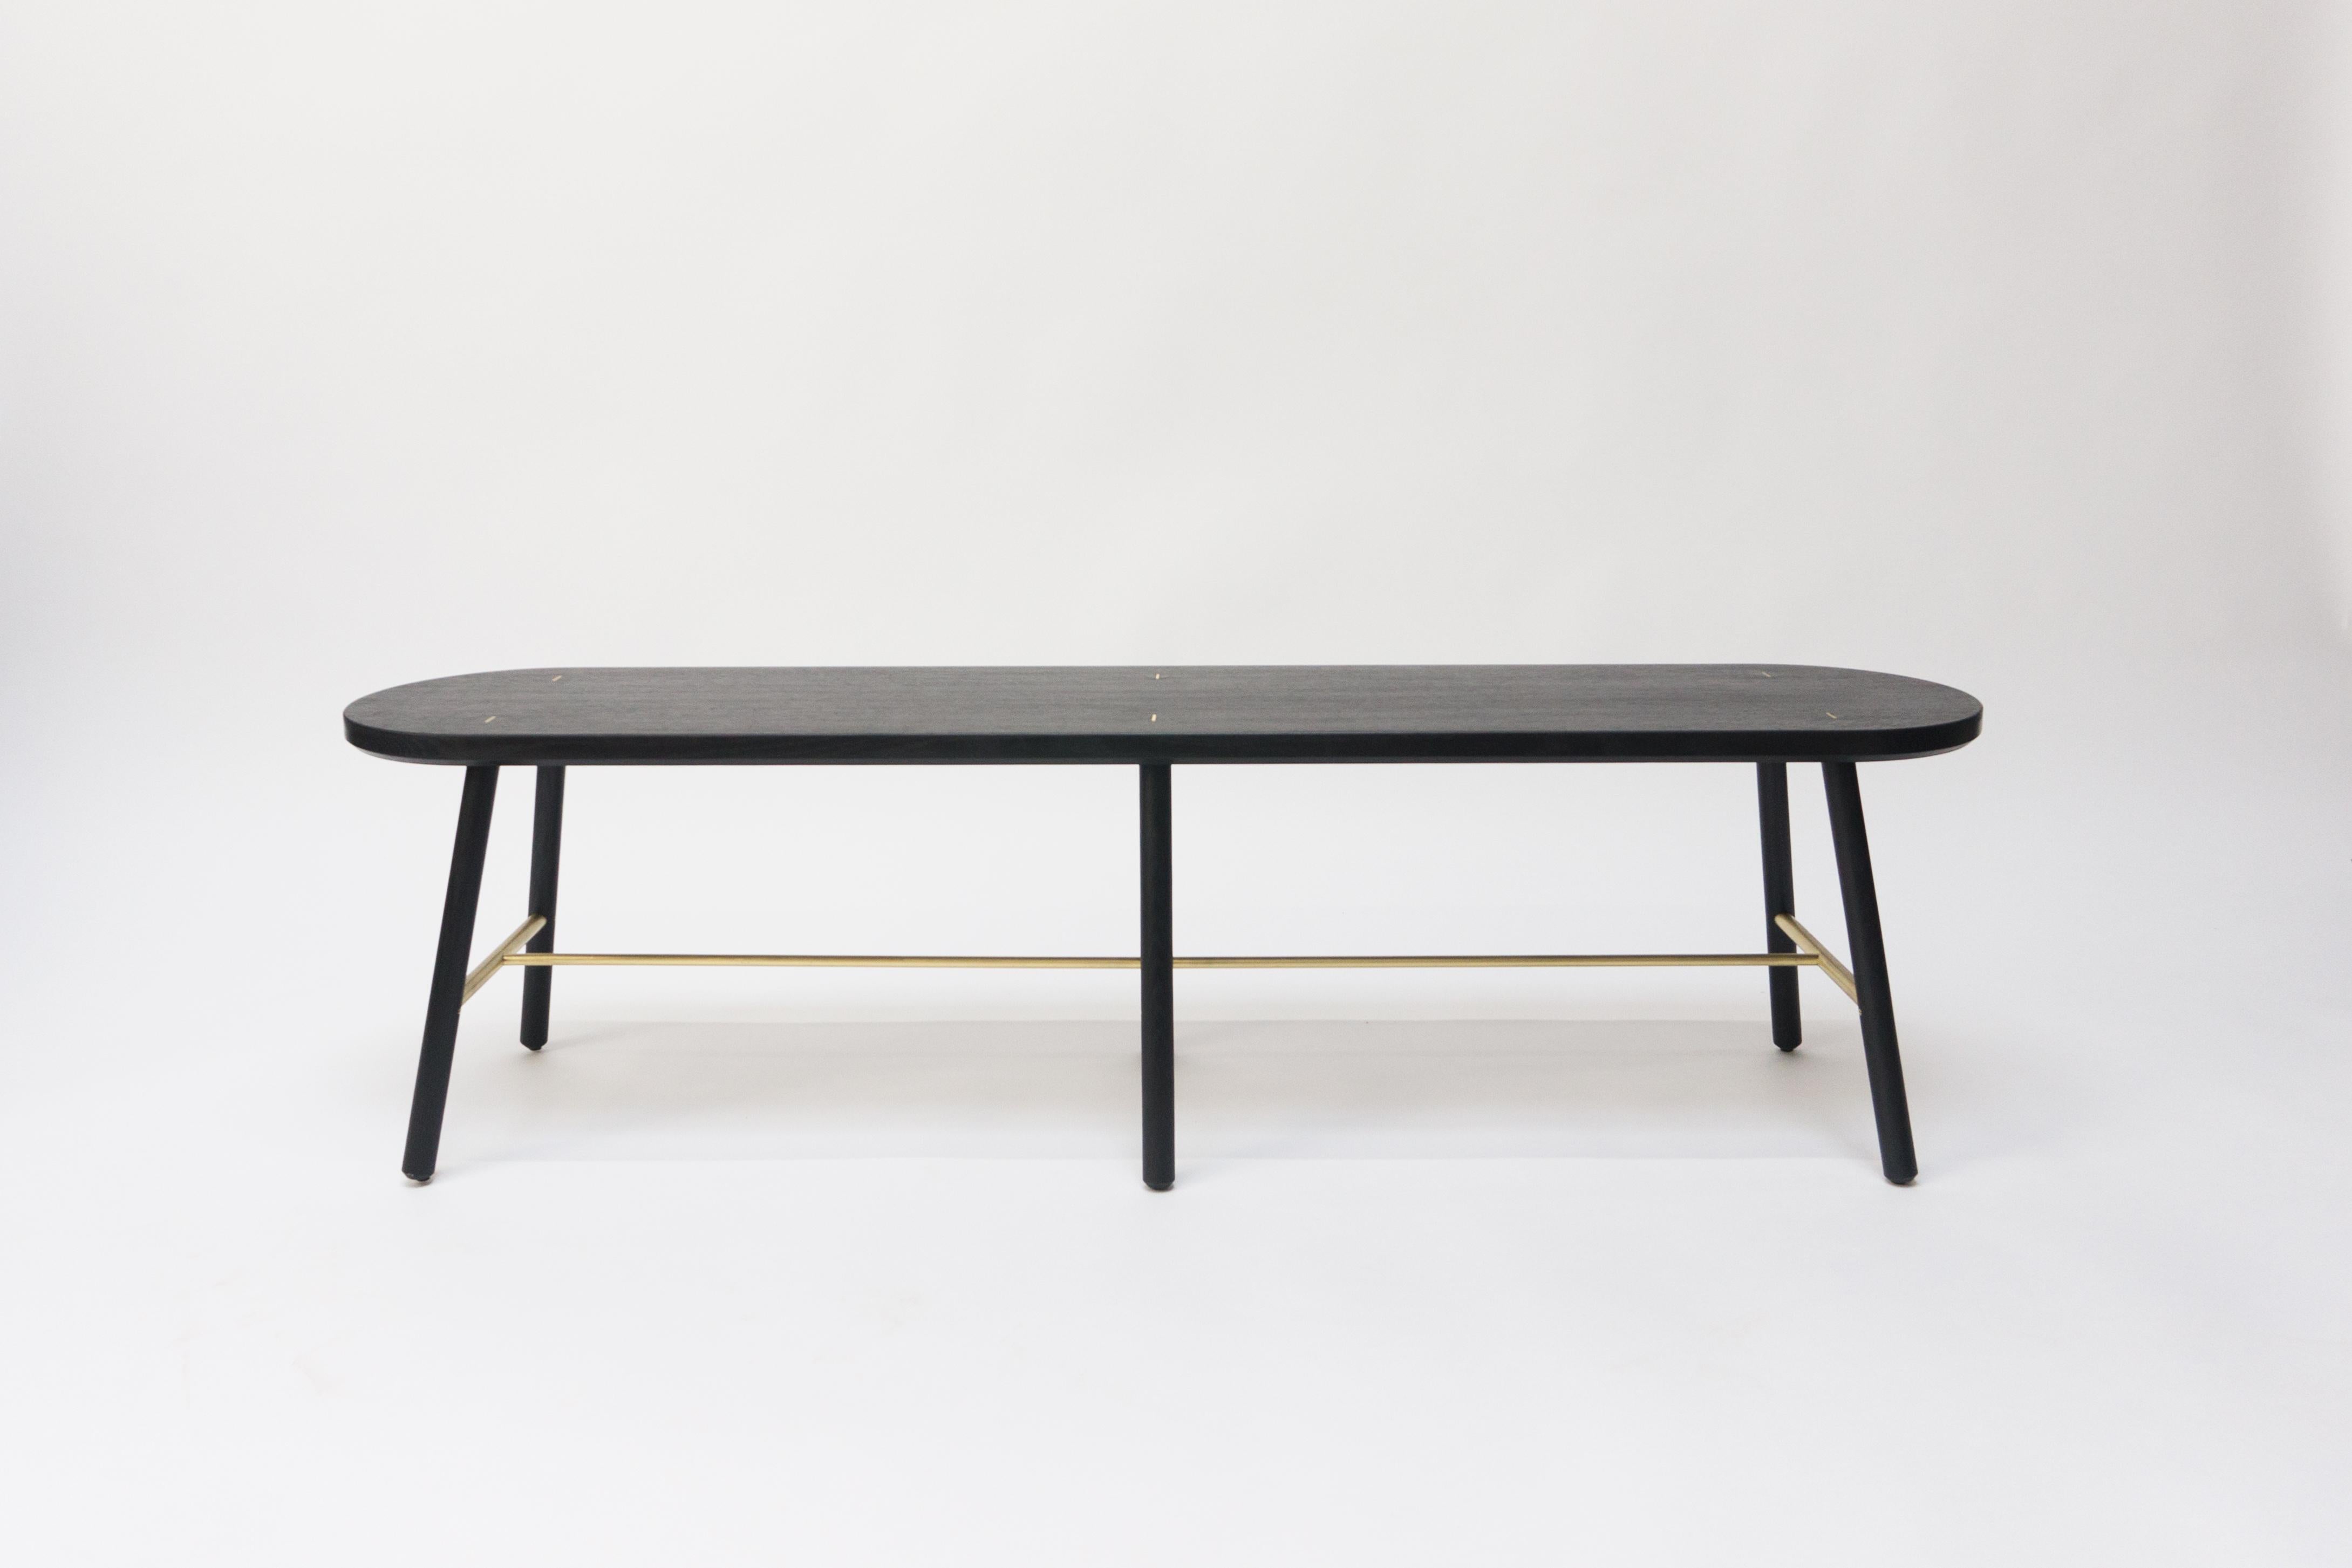 The scout bench has a slim design, allowing it to be tucked into small spaces with a minimal footprint.

Shown in blackened/ebonized oak and brass. Domestic hardwood species available include white oak, walnut, maple or ash. Hand rubbed oil